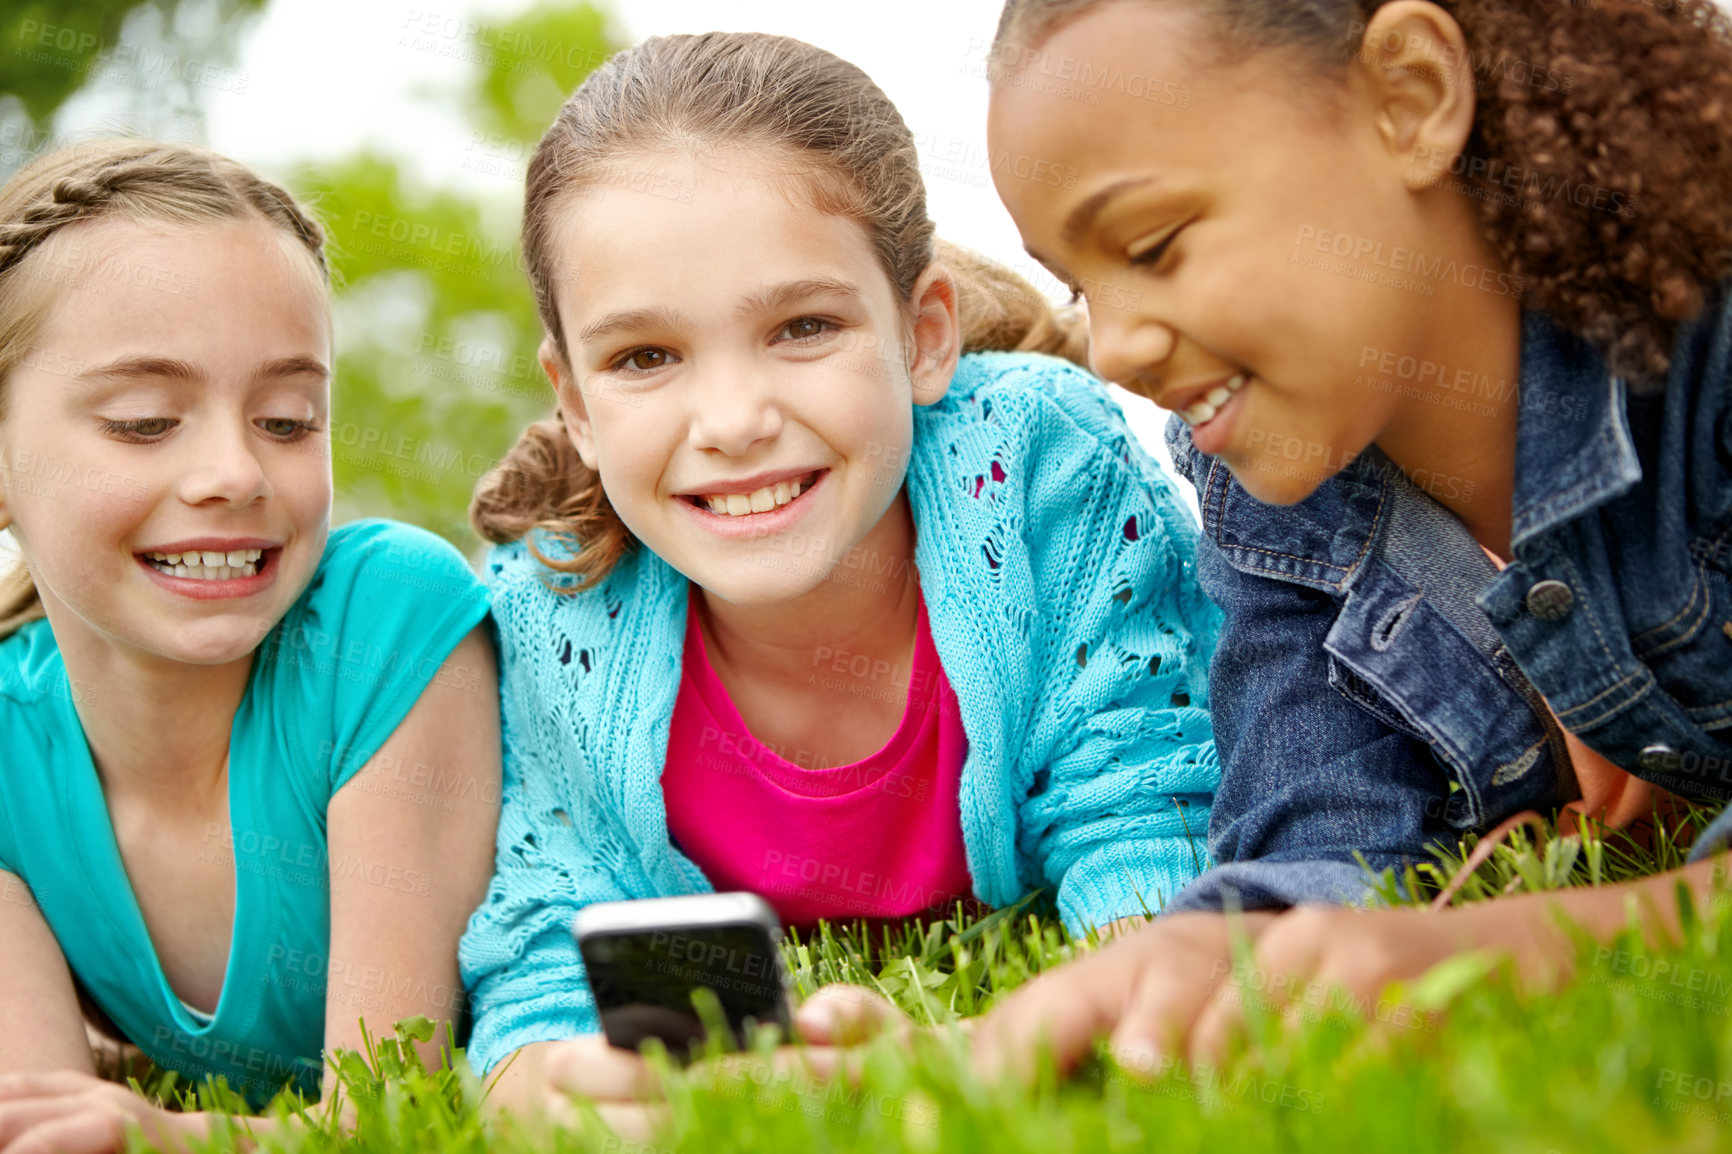 Buy stock photo Three happy young girls sitting outside texting on a cellphone 